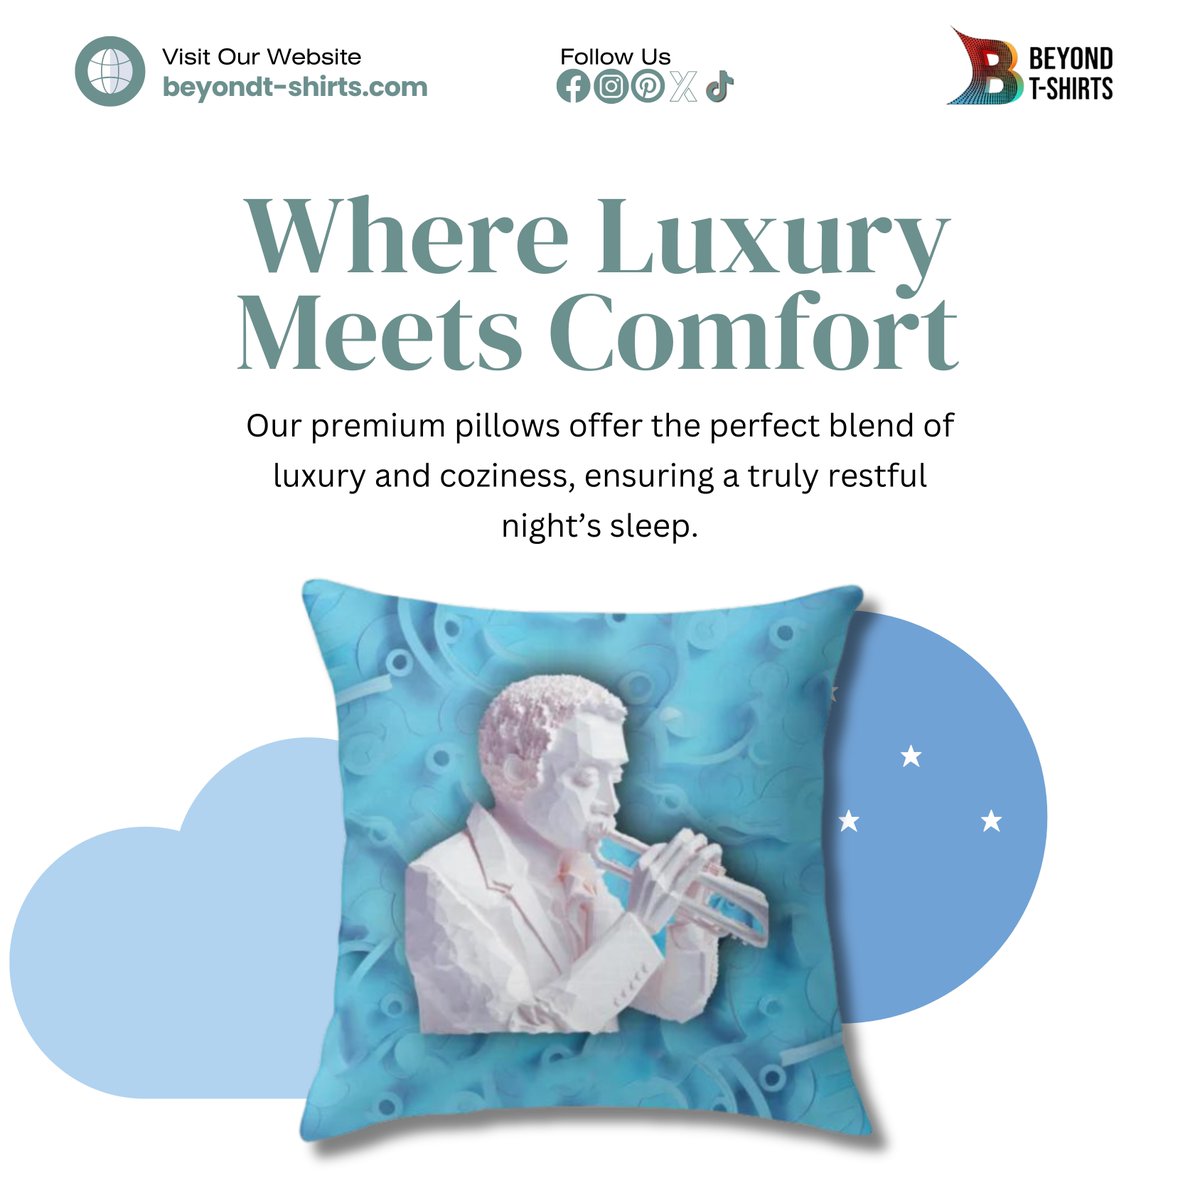 Unwind in the embrace of luxury with our premium pillows, where every moment of rest is a melody of comfort. 🌙✨ Elevate your nights with #BeyondComfort. #LuxurySleep #SerenadeOfSlumber #PillowLuxury #DreamyComfort #ElegantSlumber #ChicPillows #PlushLife #SoothingSleep